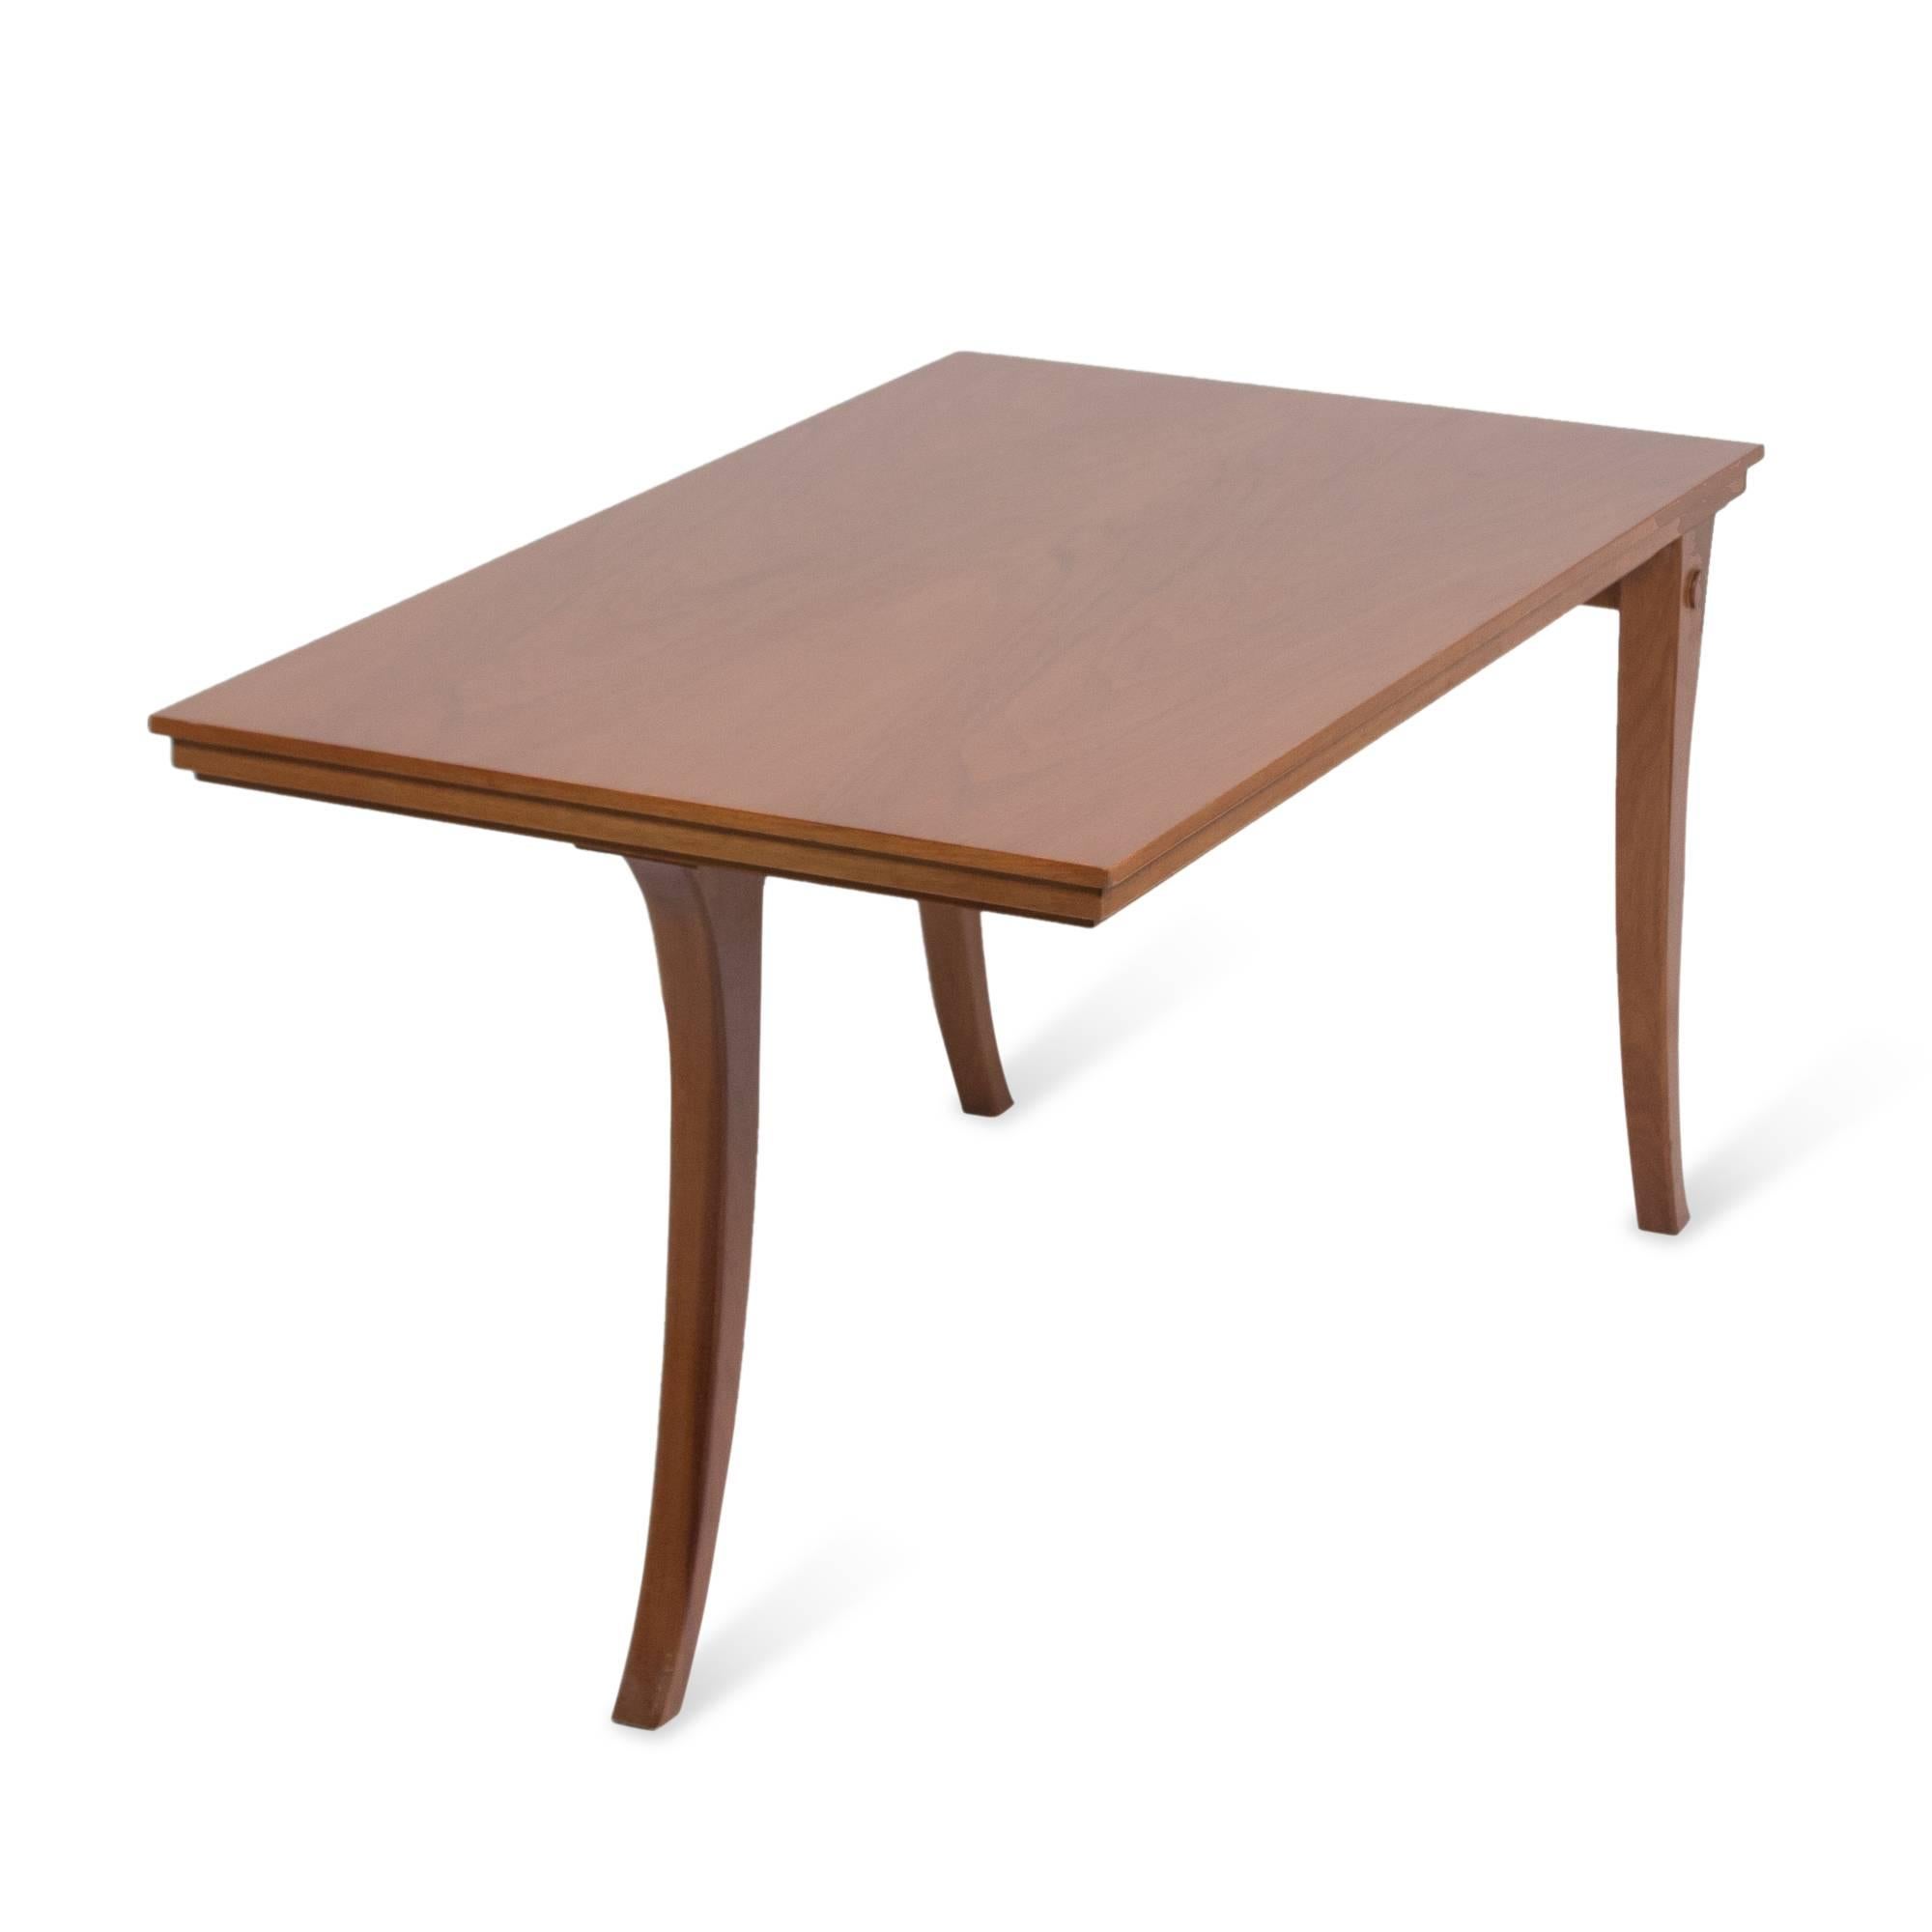 Solid walnut coffee or end table, of rectangular form, the surface supported by three tapered and slightly arced legs, by T.H Robsjohn-Gibbings for Saridis, American designer for Greek company, 1960s. 18